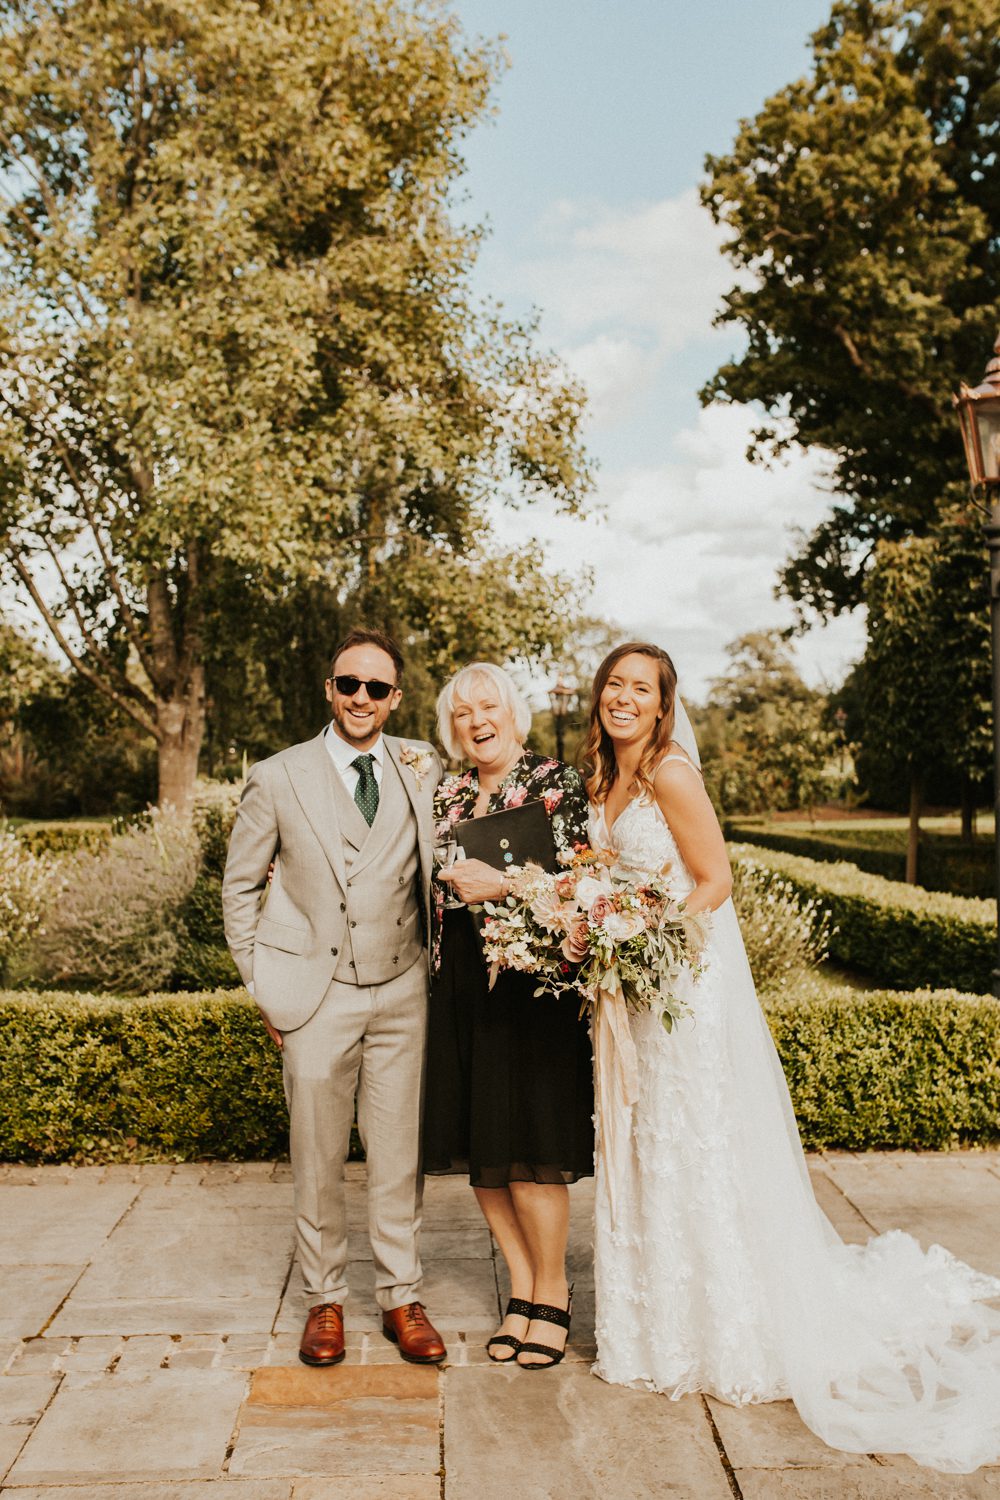 Yvonne Beck Bilingual Wedding Celebrant listed on Tie The Knot Wedding Directory